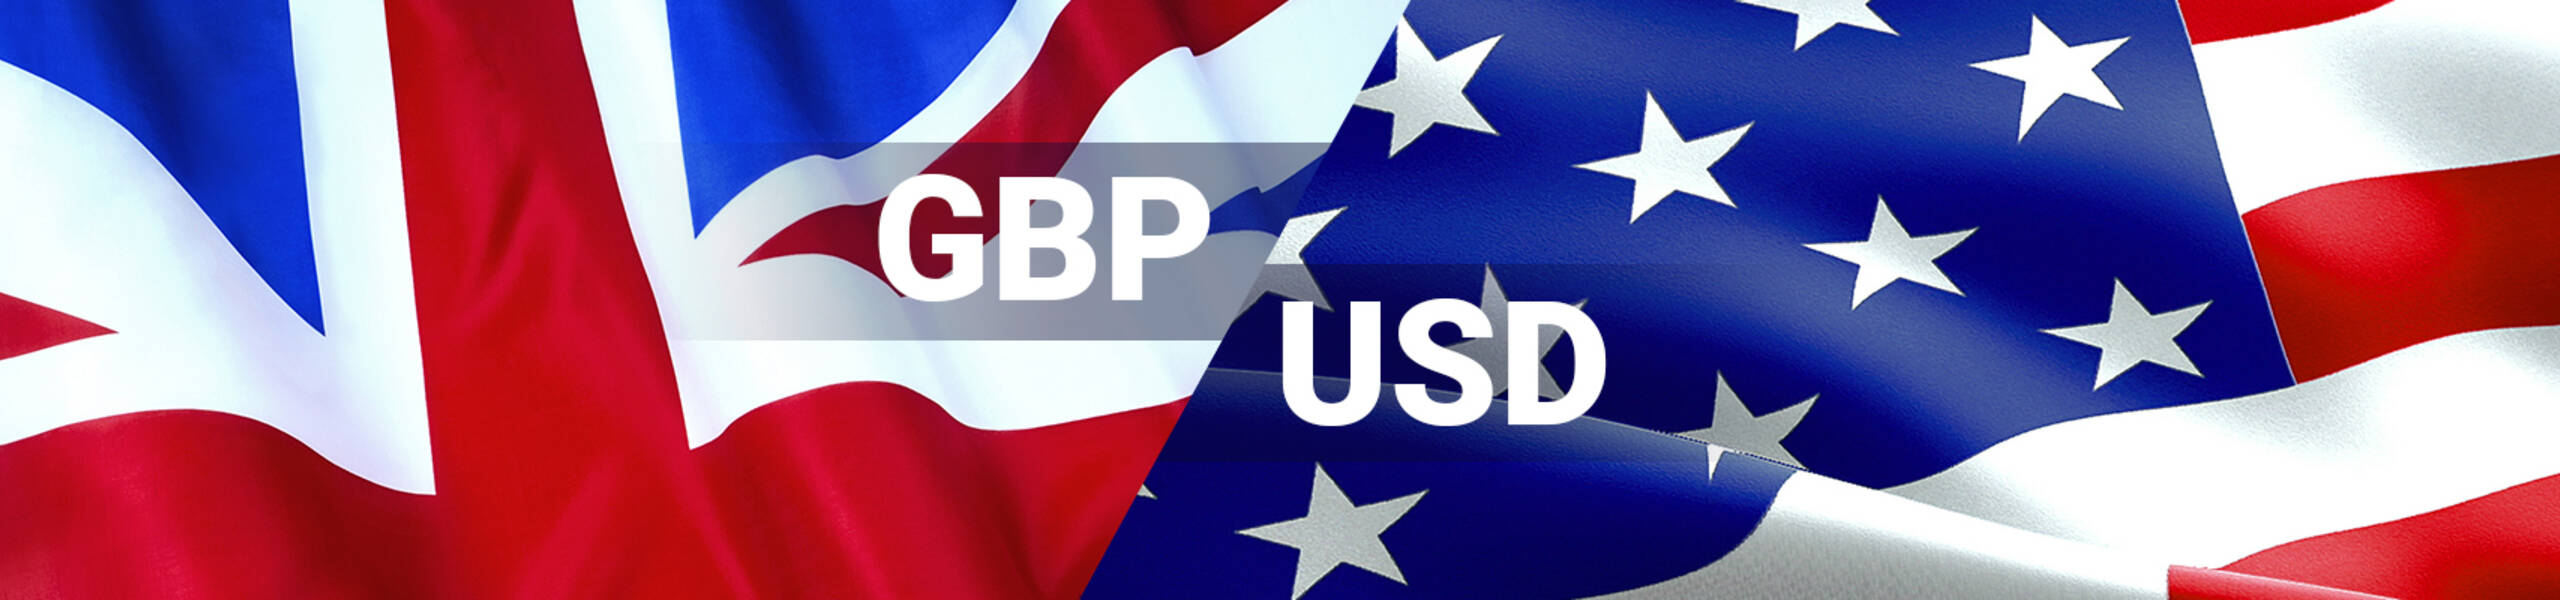 GBP/USD reached buy target 1.3270